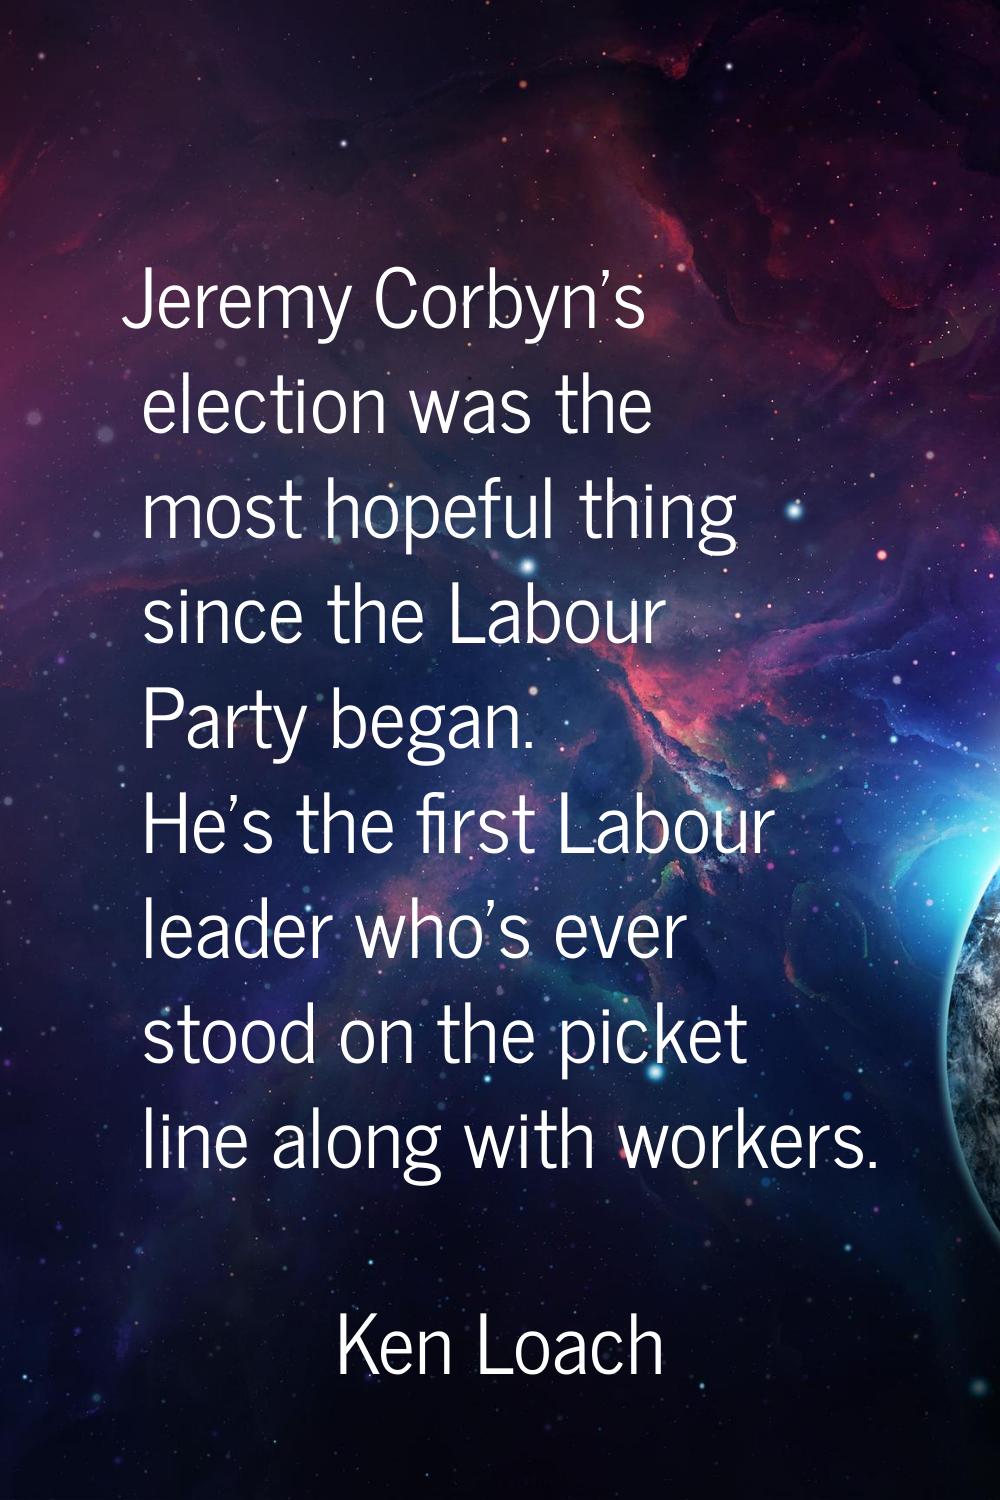 Jeremy Corbyn's election was the most hopeful thing since the Labour Party began. He's the first La